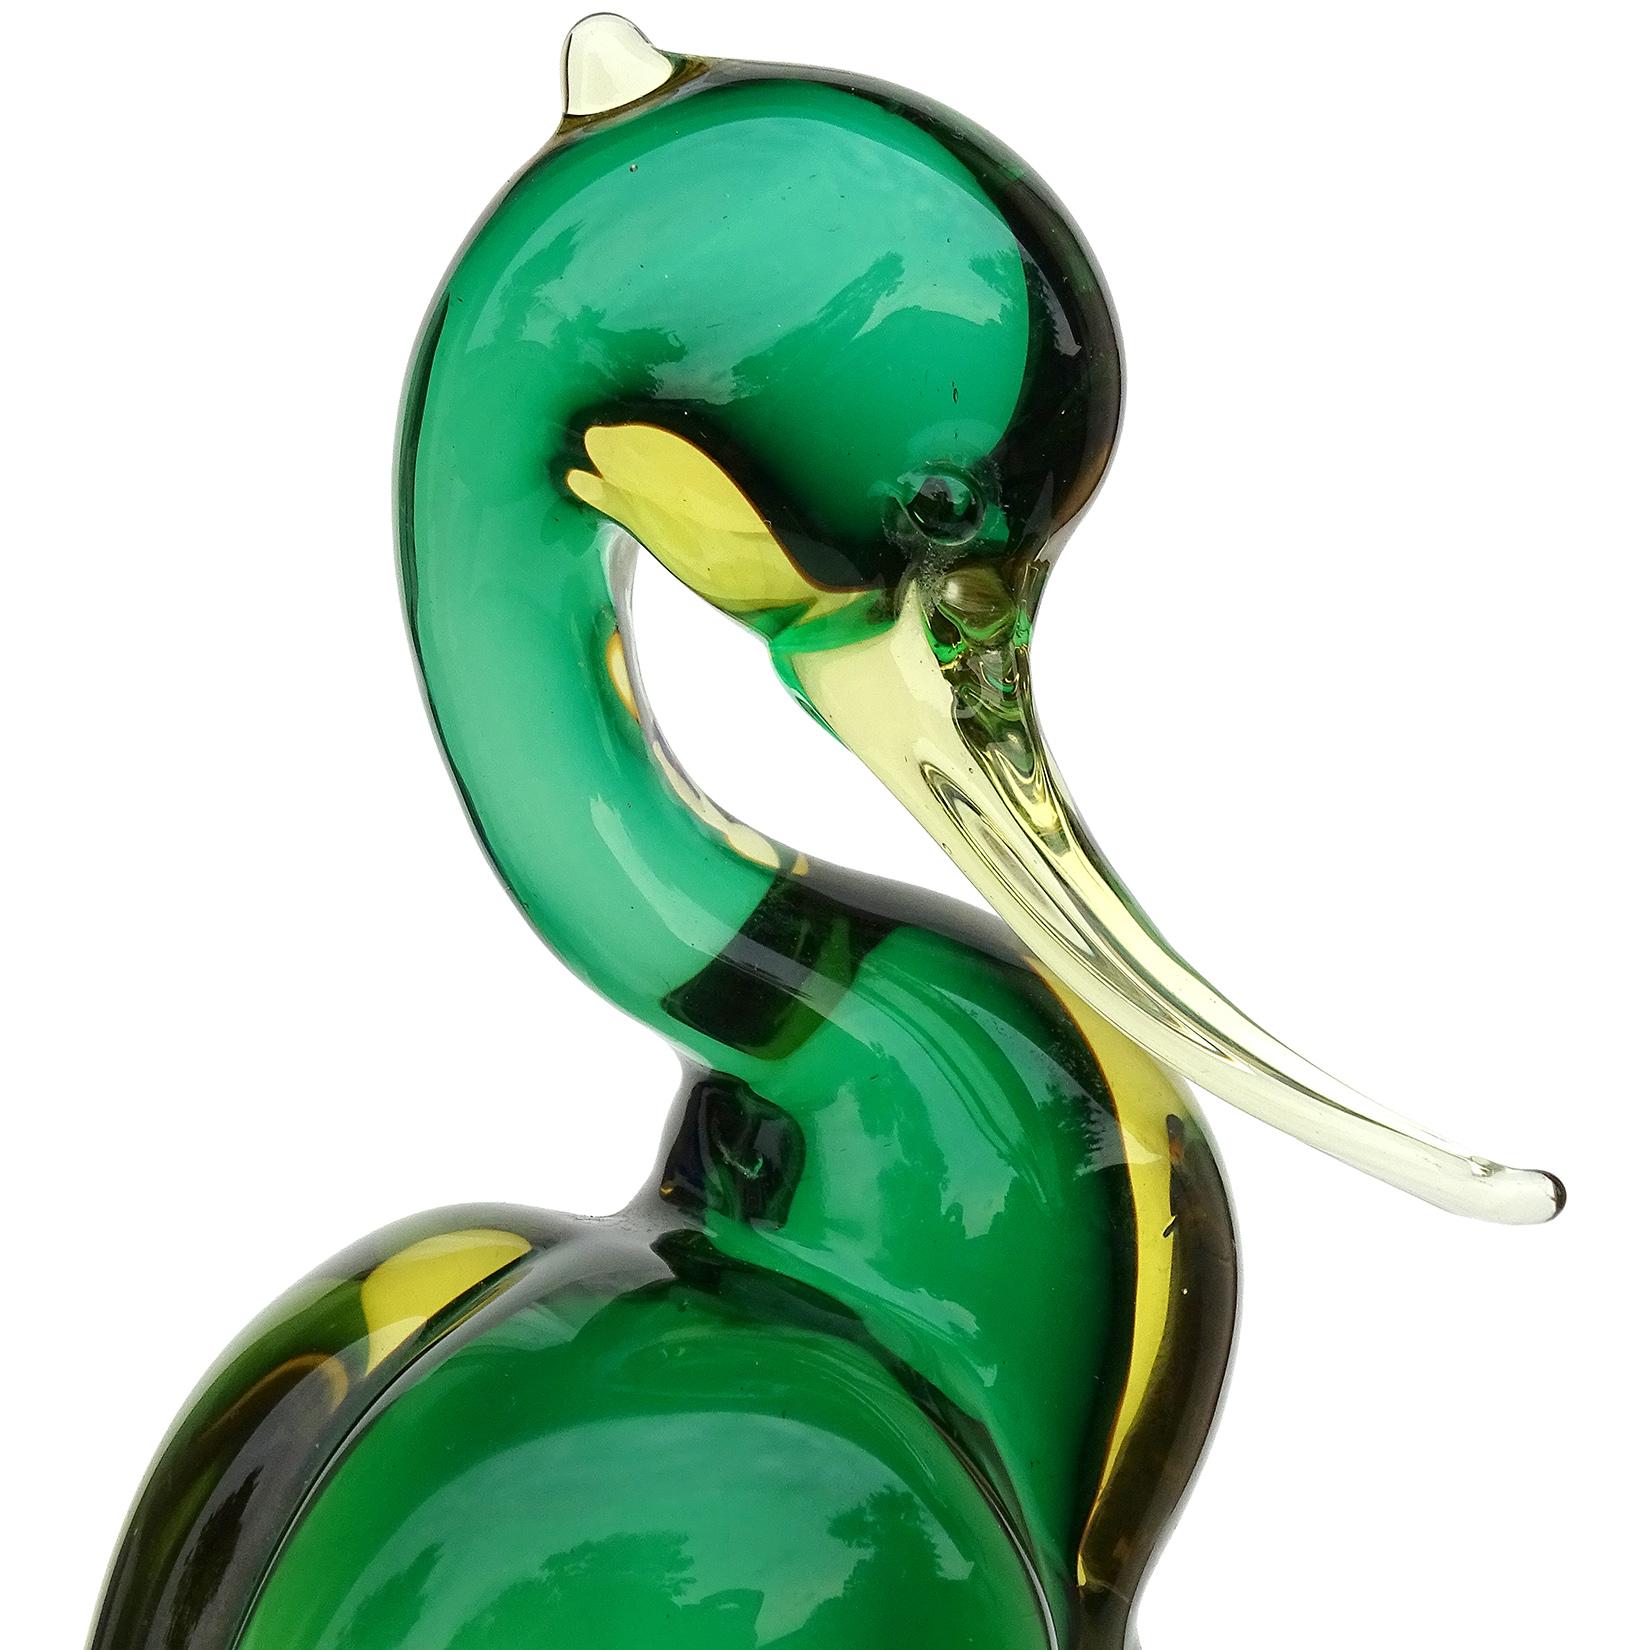 Beautiful tall vintage Murano hand blown Sommerso green to golden orange Italian art glass Heron bird sculpture. Documented to designer Archimede Seguso circa 1950s, with acid signed 